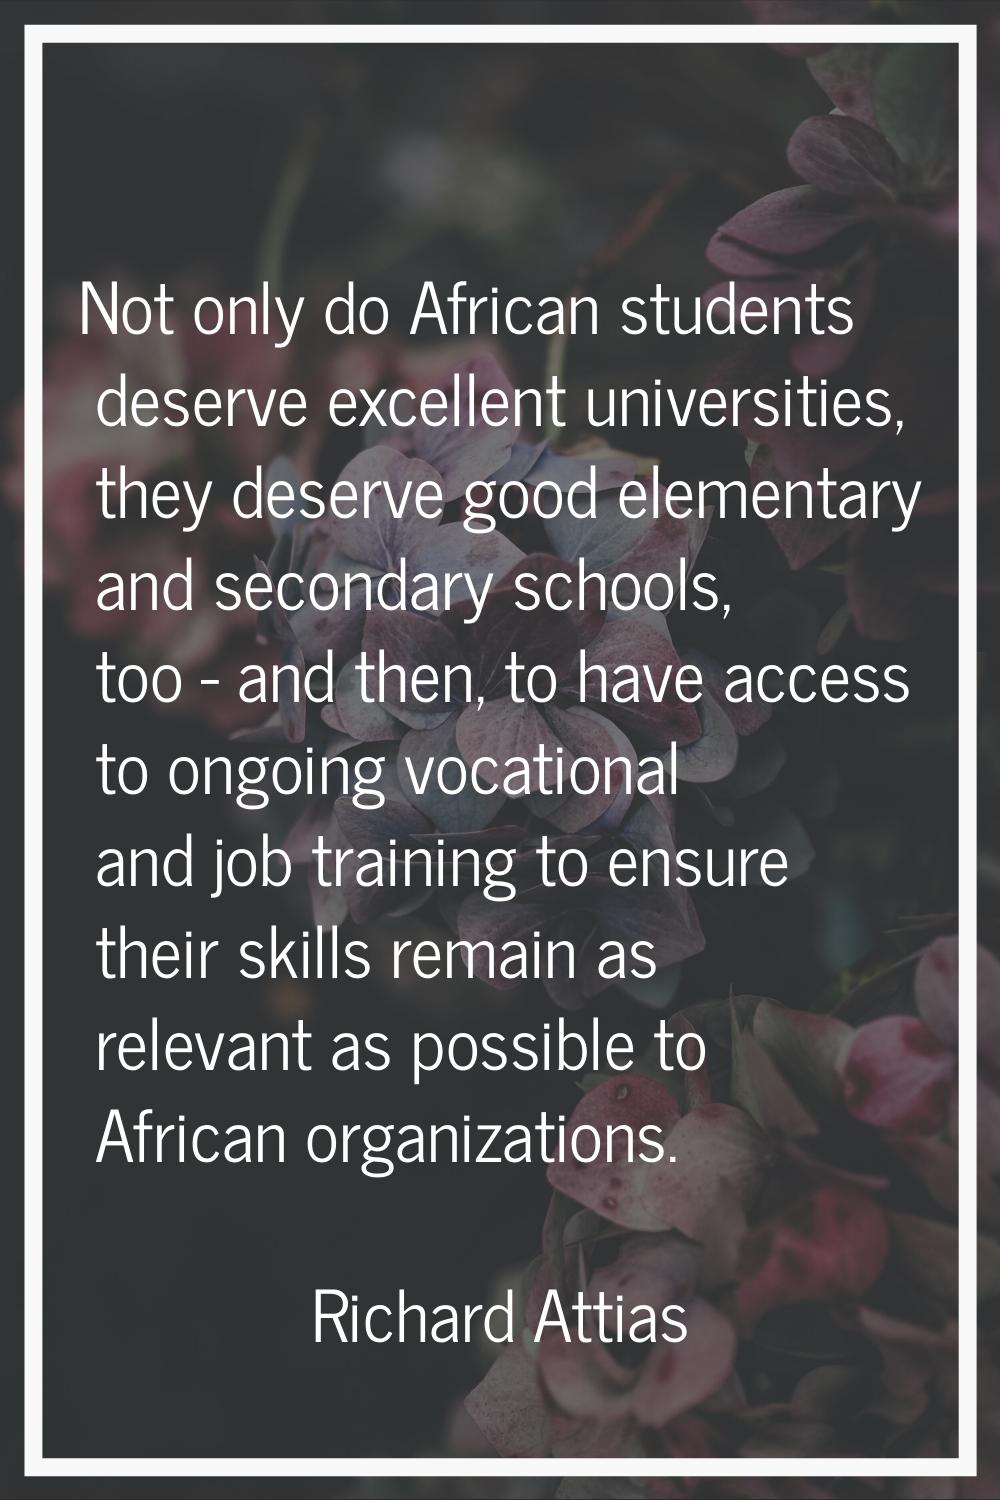 Not only do African students deserve excellent universities, they deserve good elementary and secon